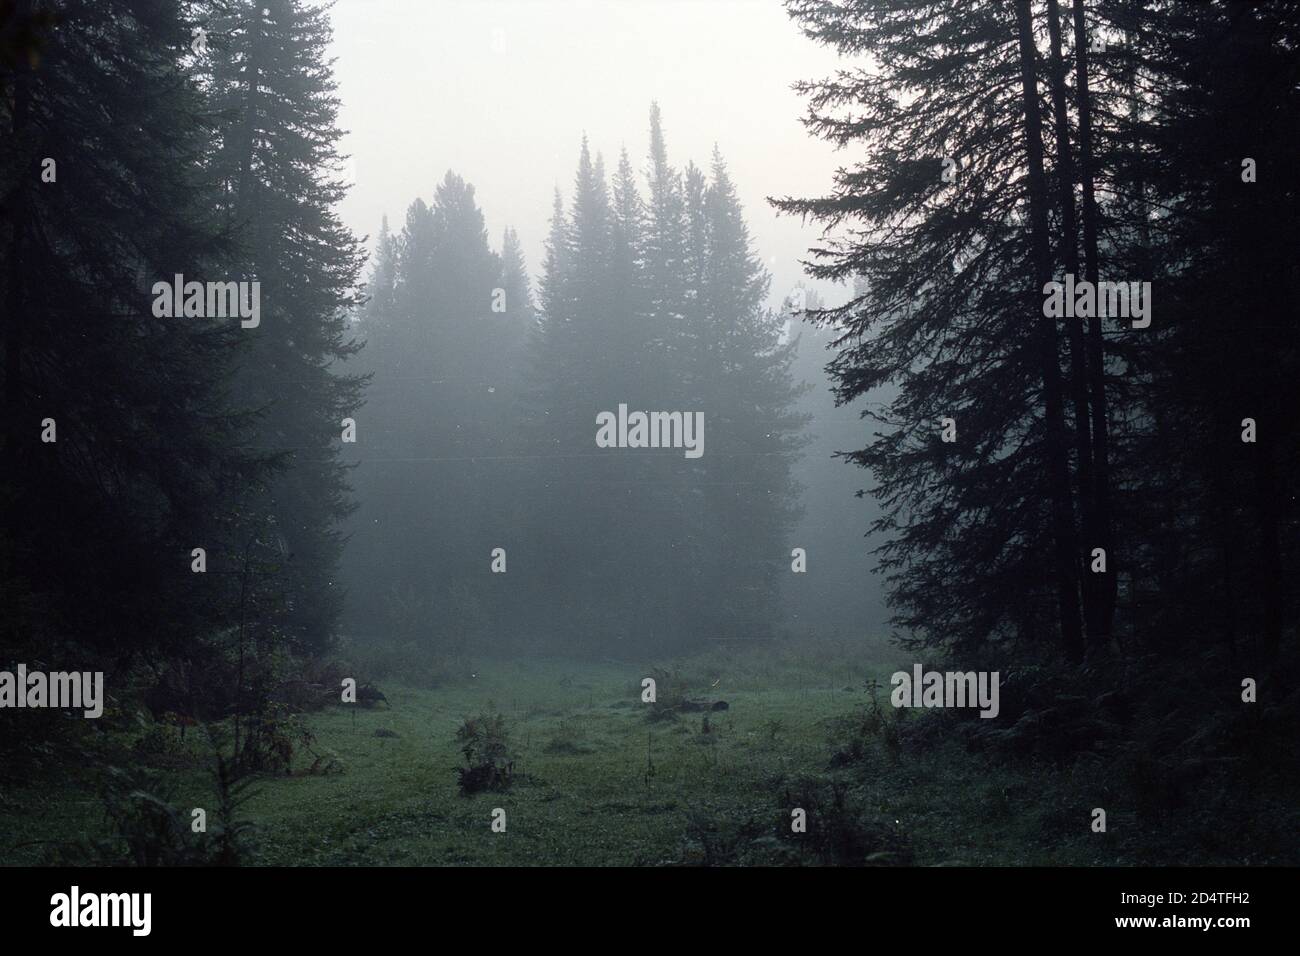 Vintage landscape in dark taiga with coniferous trees on film. Mystic mist in eerie forest in horror style. Atmospheric scanned analog photography wit Stock Photo